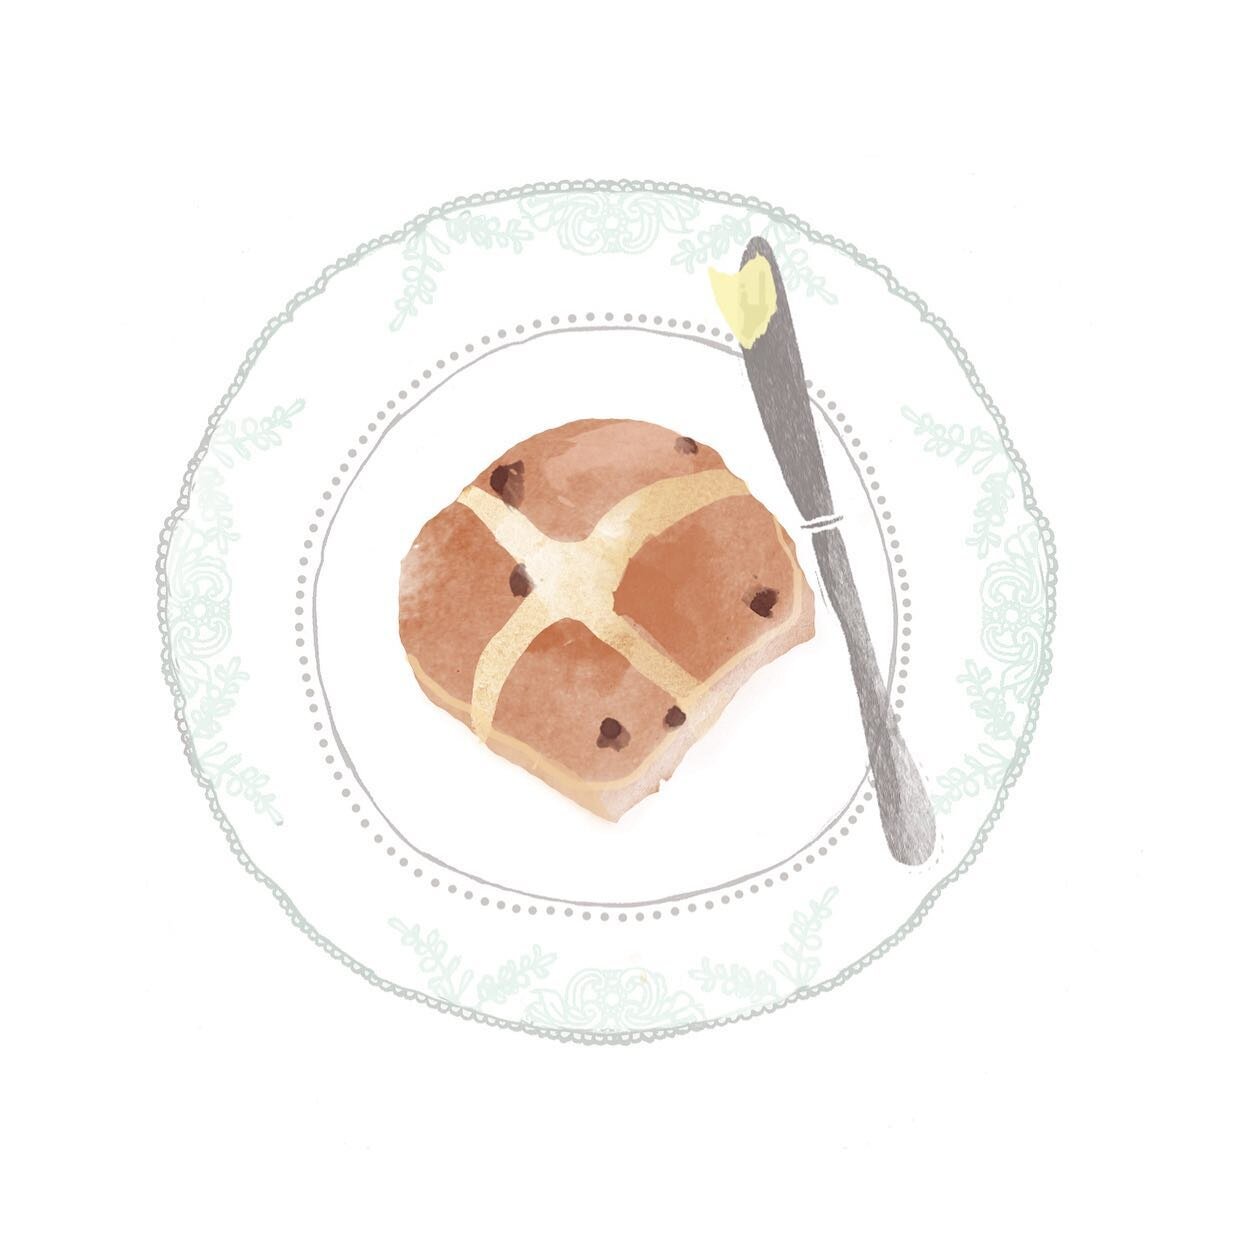 It&rsquo;s always a Good Friday when the hot cross buns come out to play!! 🐰

#goodfriday #hotcrossbuns #eastertreat #goodforthesoul #buttery #bakedgoods #nostalgicflavours #tasteslikehappy #foodillustration #butterup #warmsmyheart